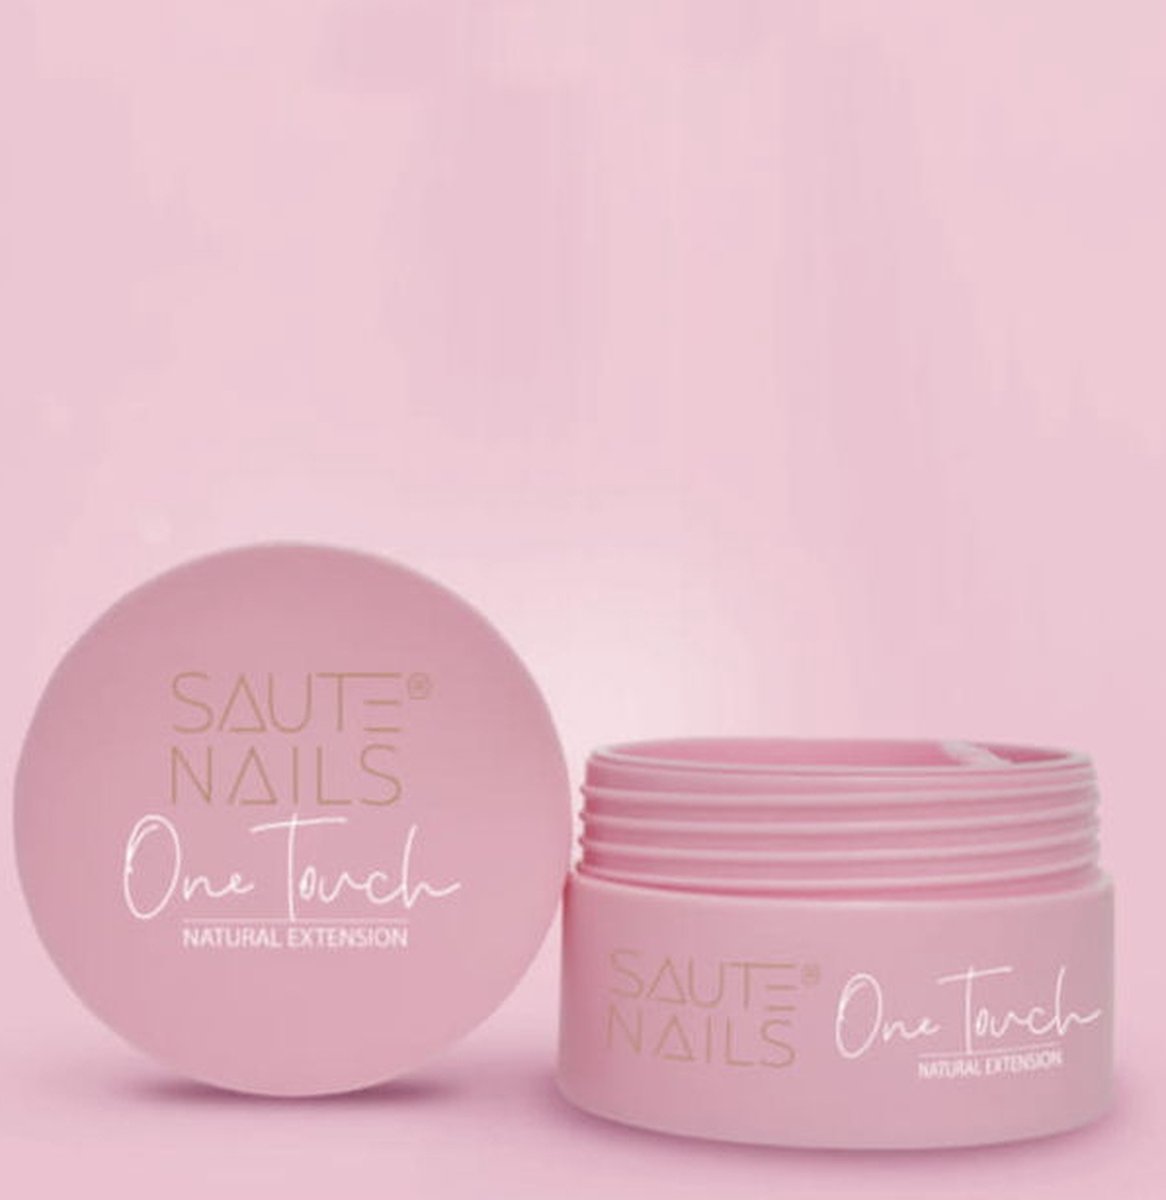 SAUTE Nails One Touch Builder Gel Natural Extension 50g